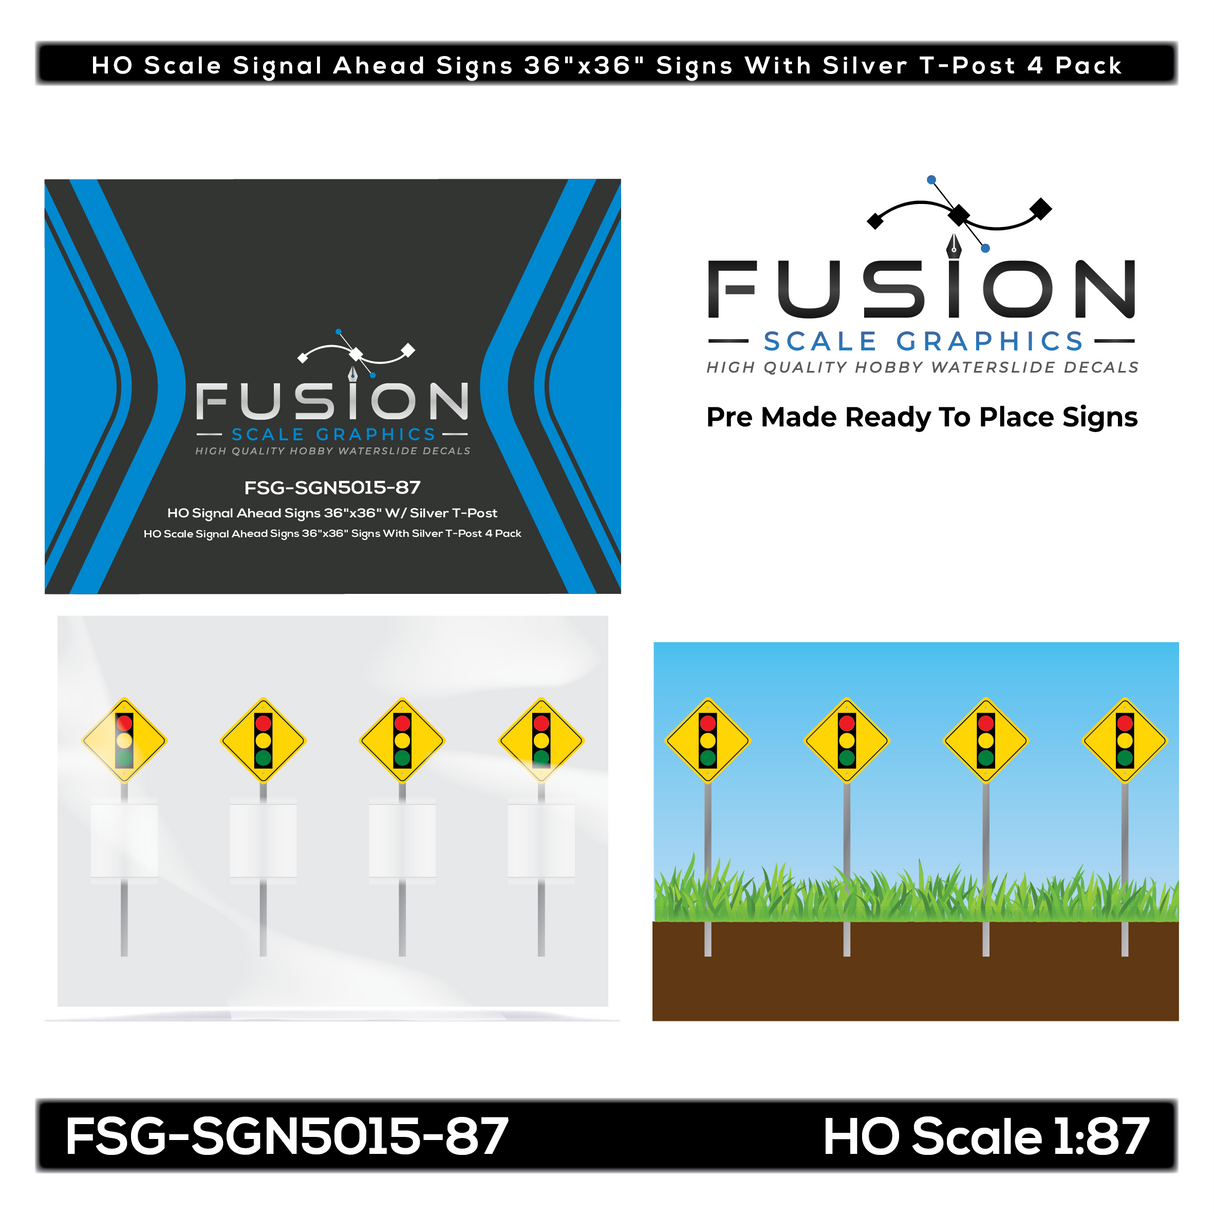 HO Scale Signal Ahead 36"x36" Signs With Silver T-Post 4 Pack